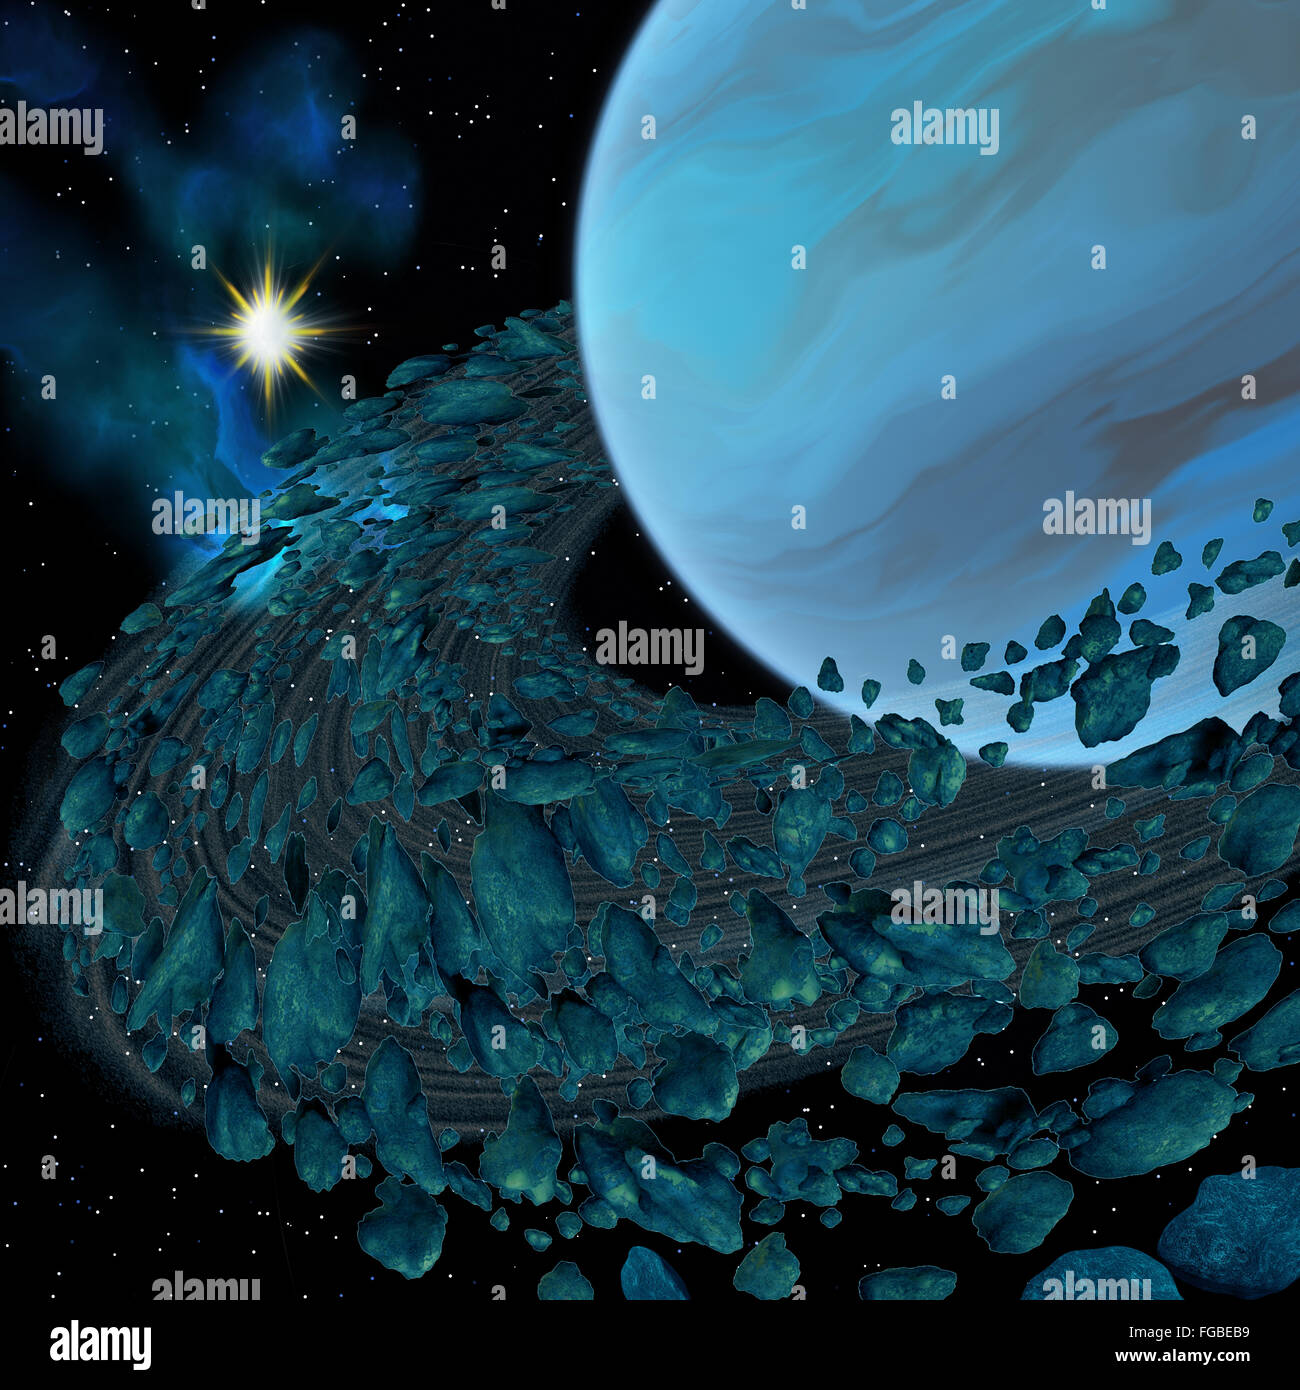 A planetary ring consisting of moons or moonlets orbit around a blue planet near a large star and blue nebula. Stock Photo